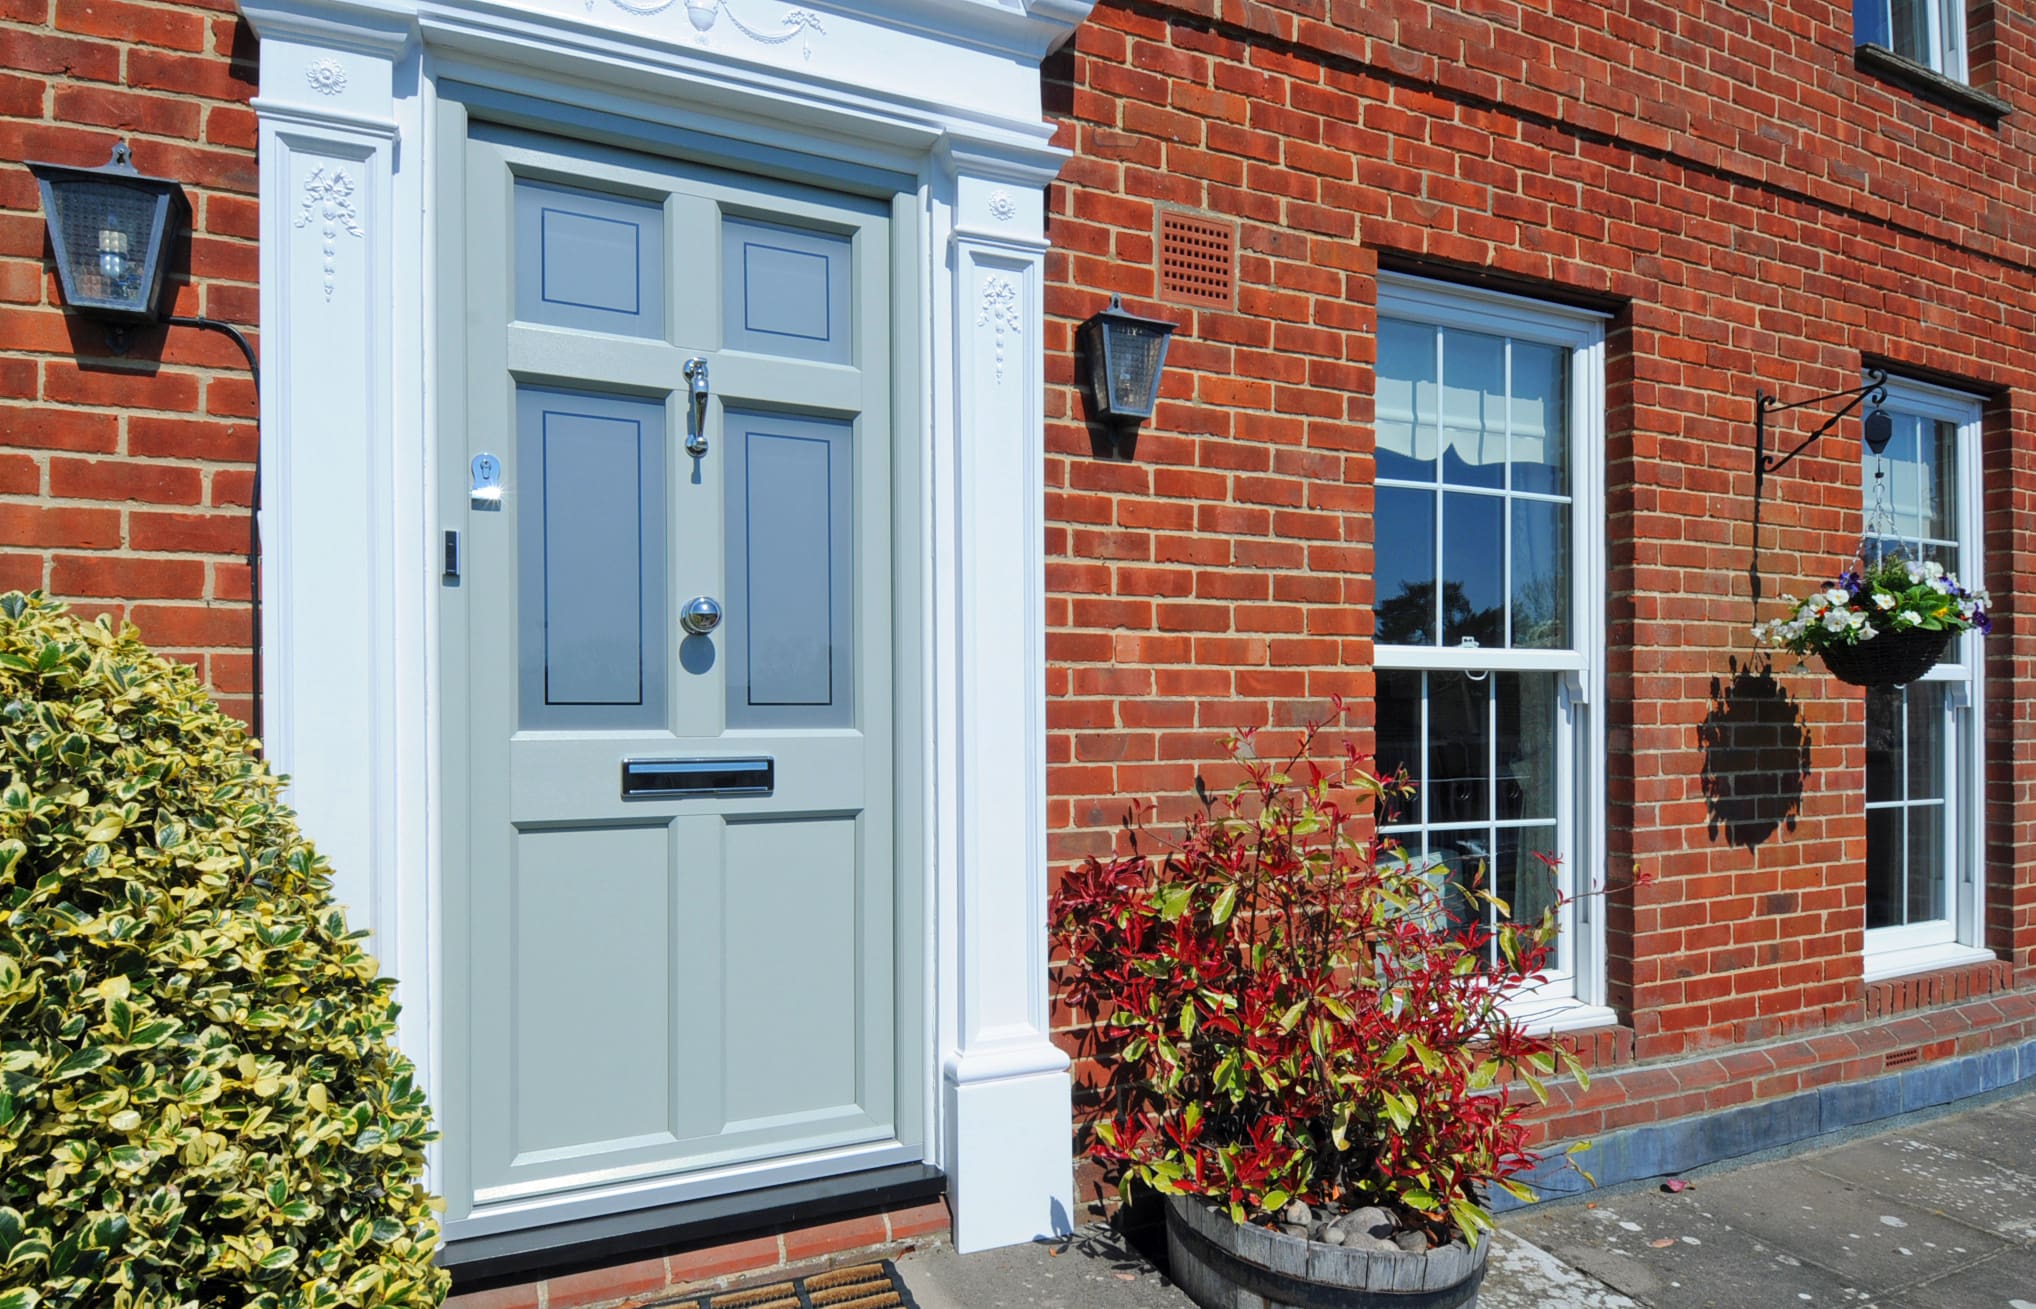 Traditional front door to townhouse property in olive green with silver furnishings.